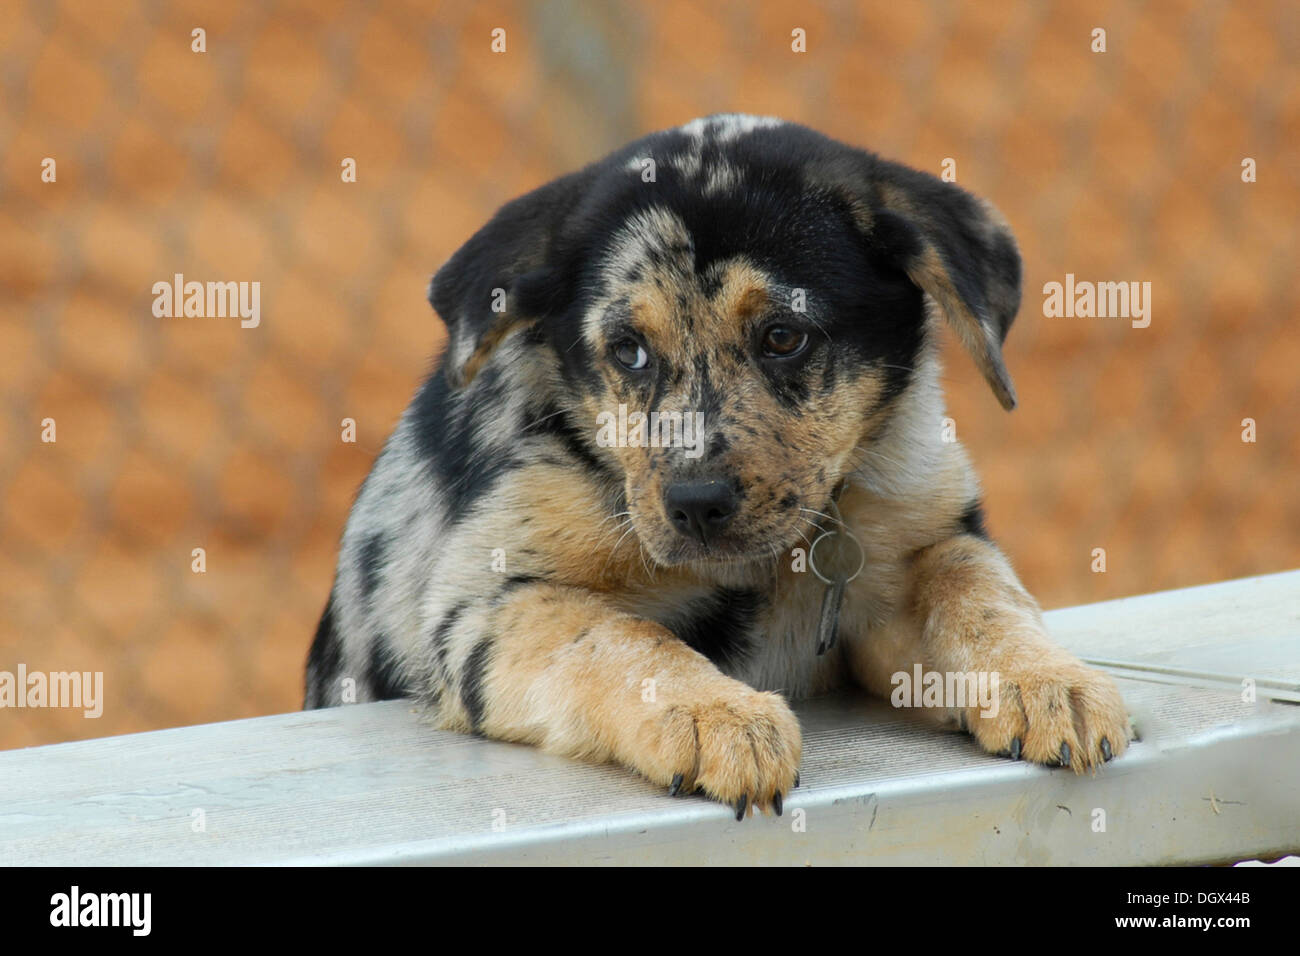 A puppy hanging out at the ballpark Stock Photo